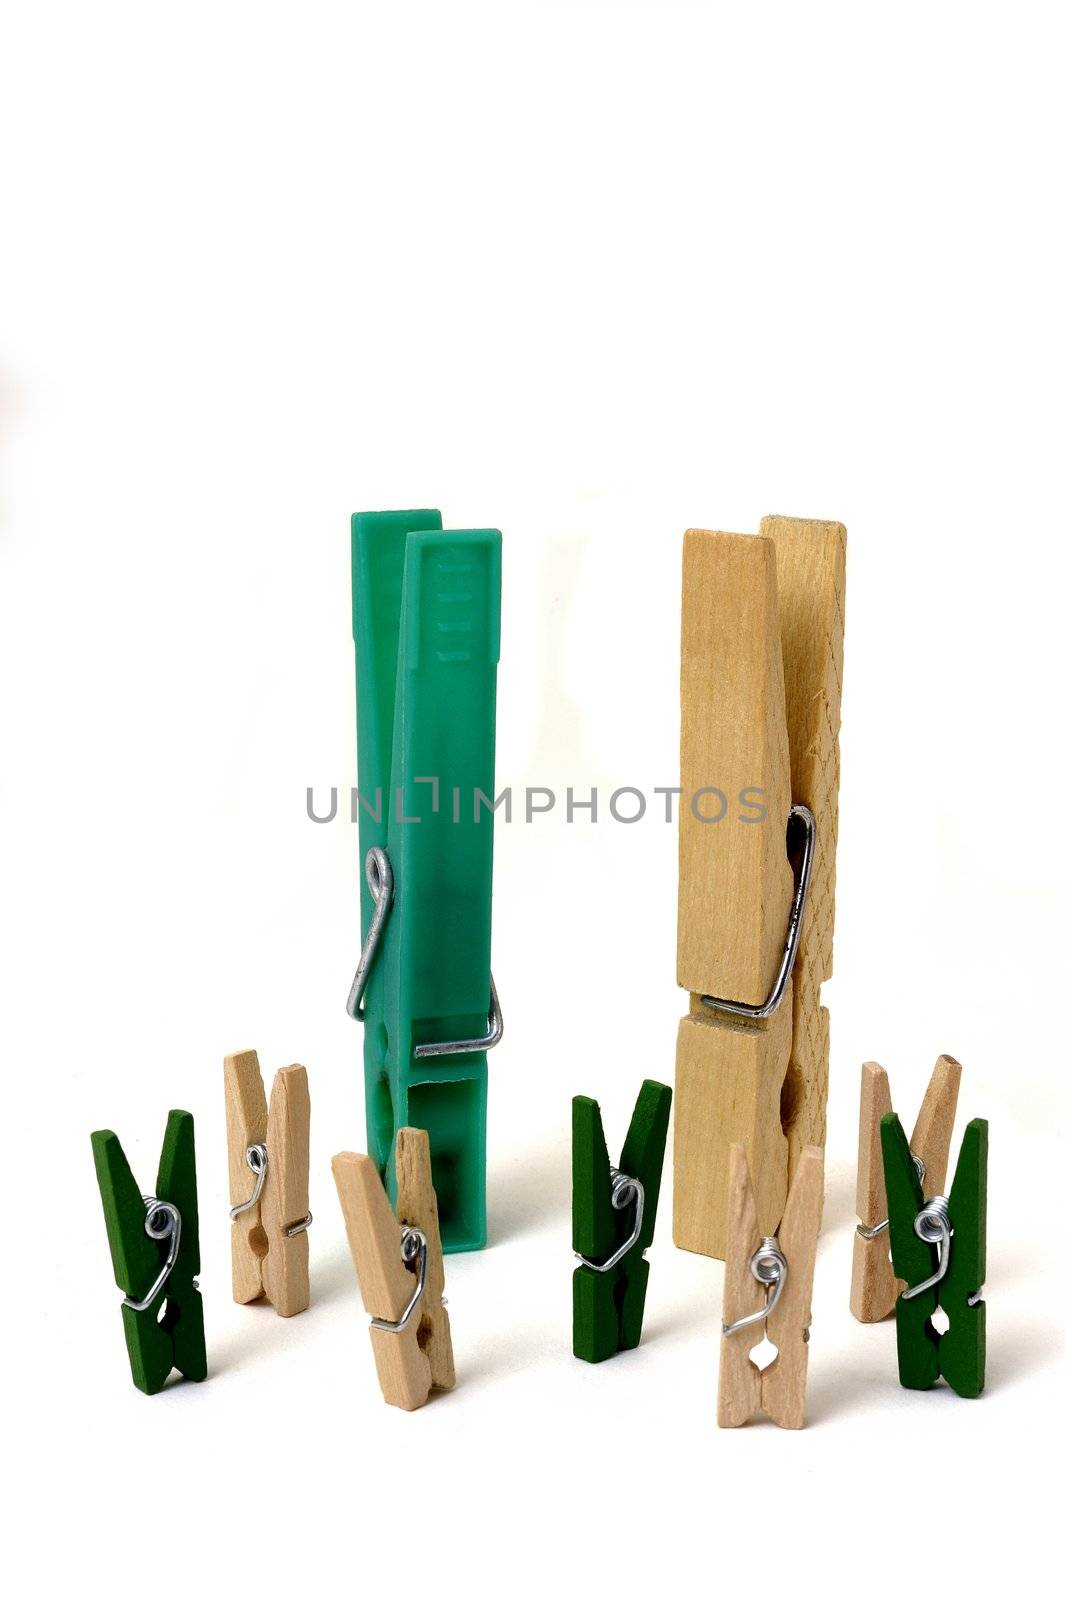 family of clothes pegs